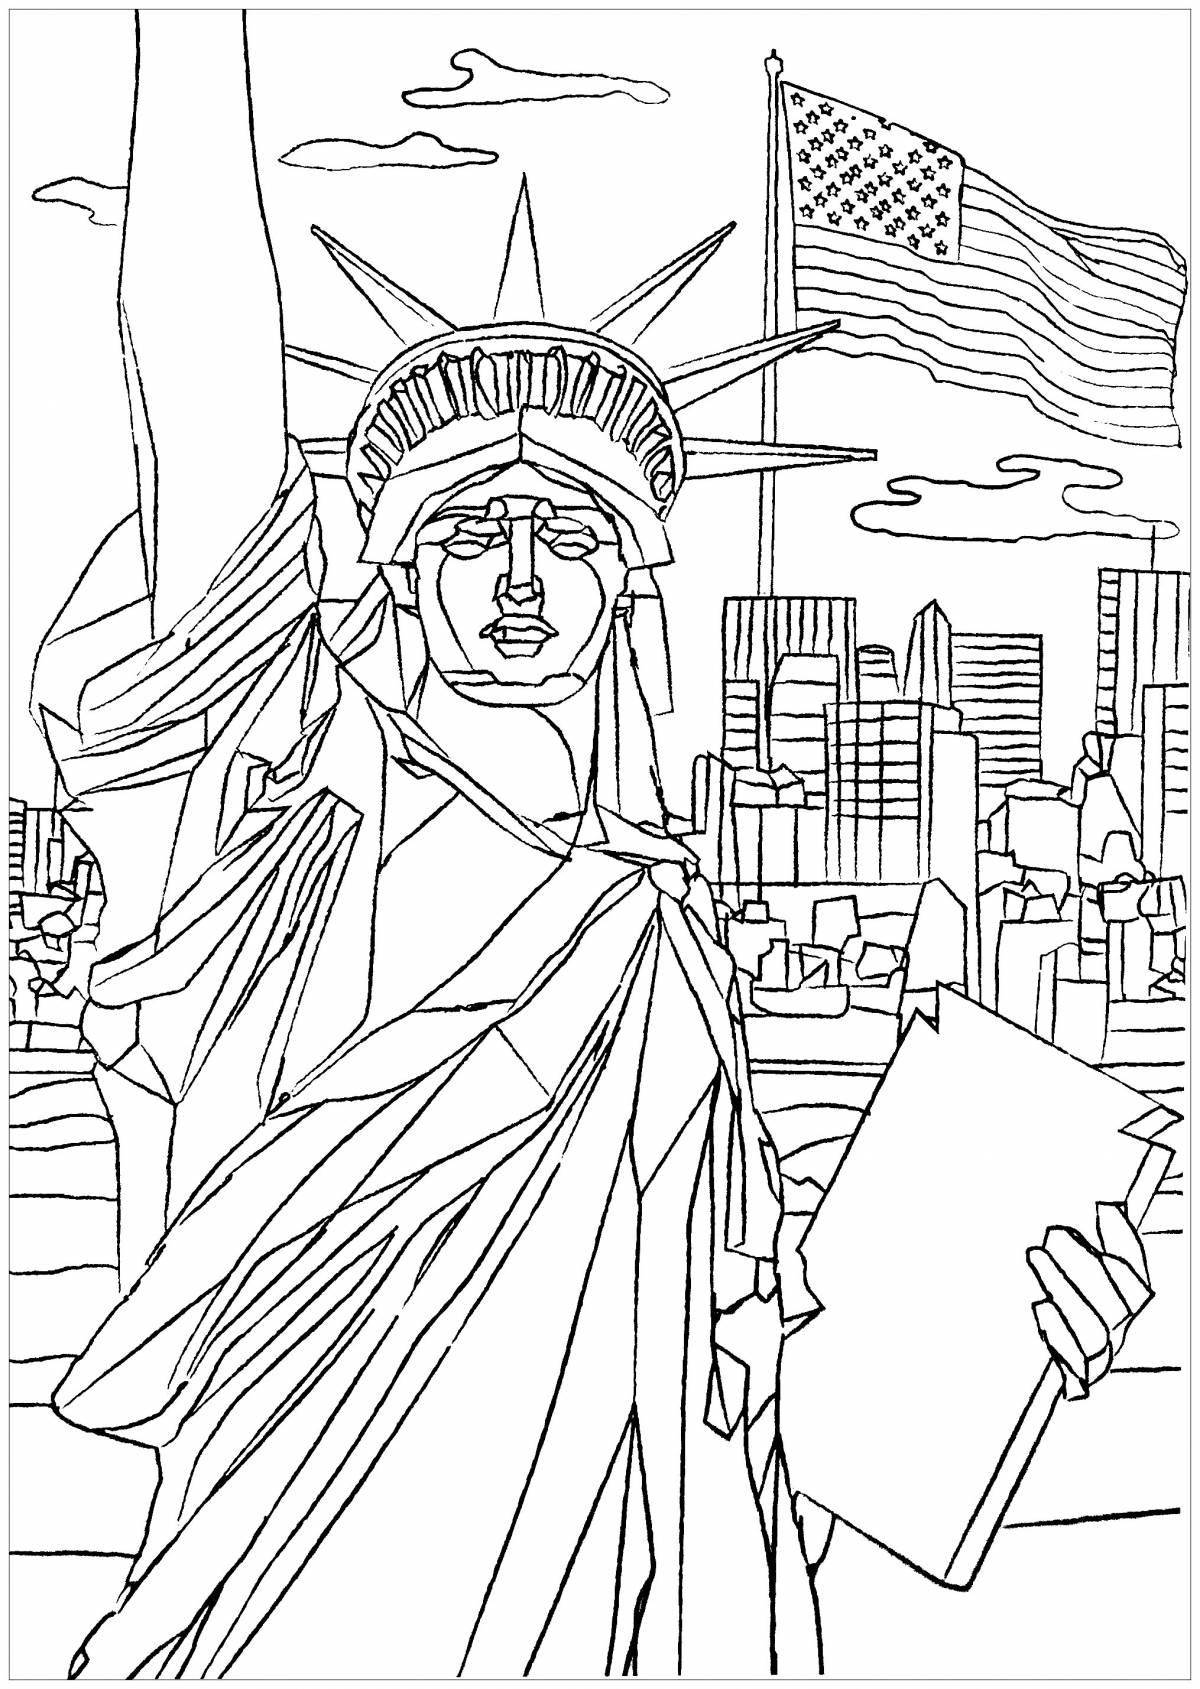 The famous statue of liberty coloring page